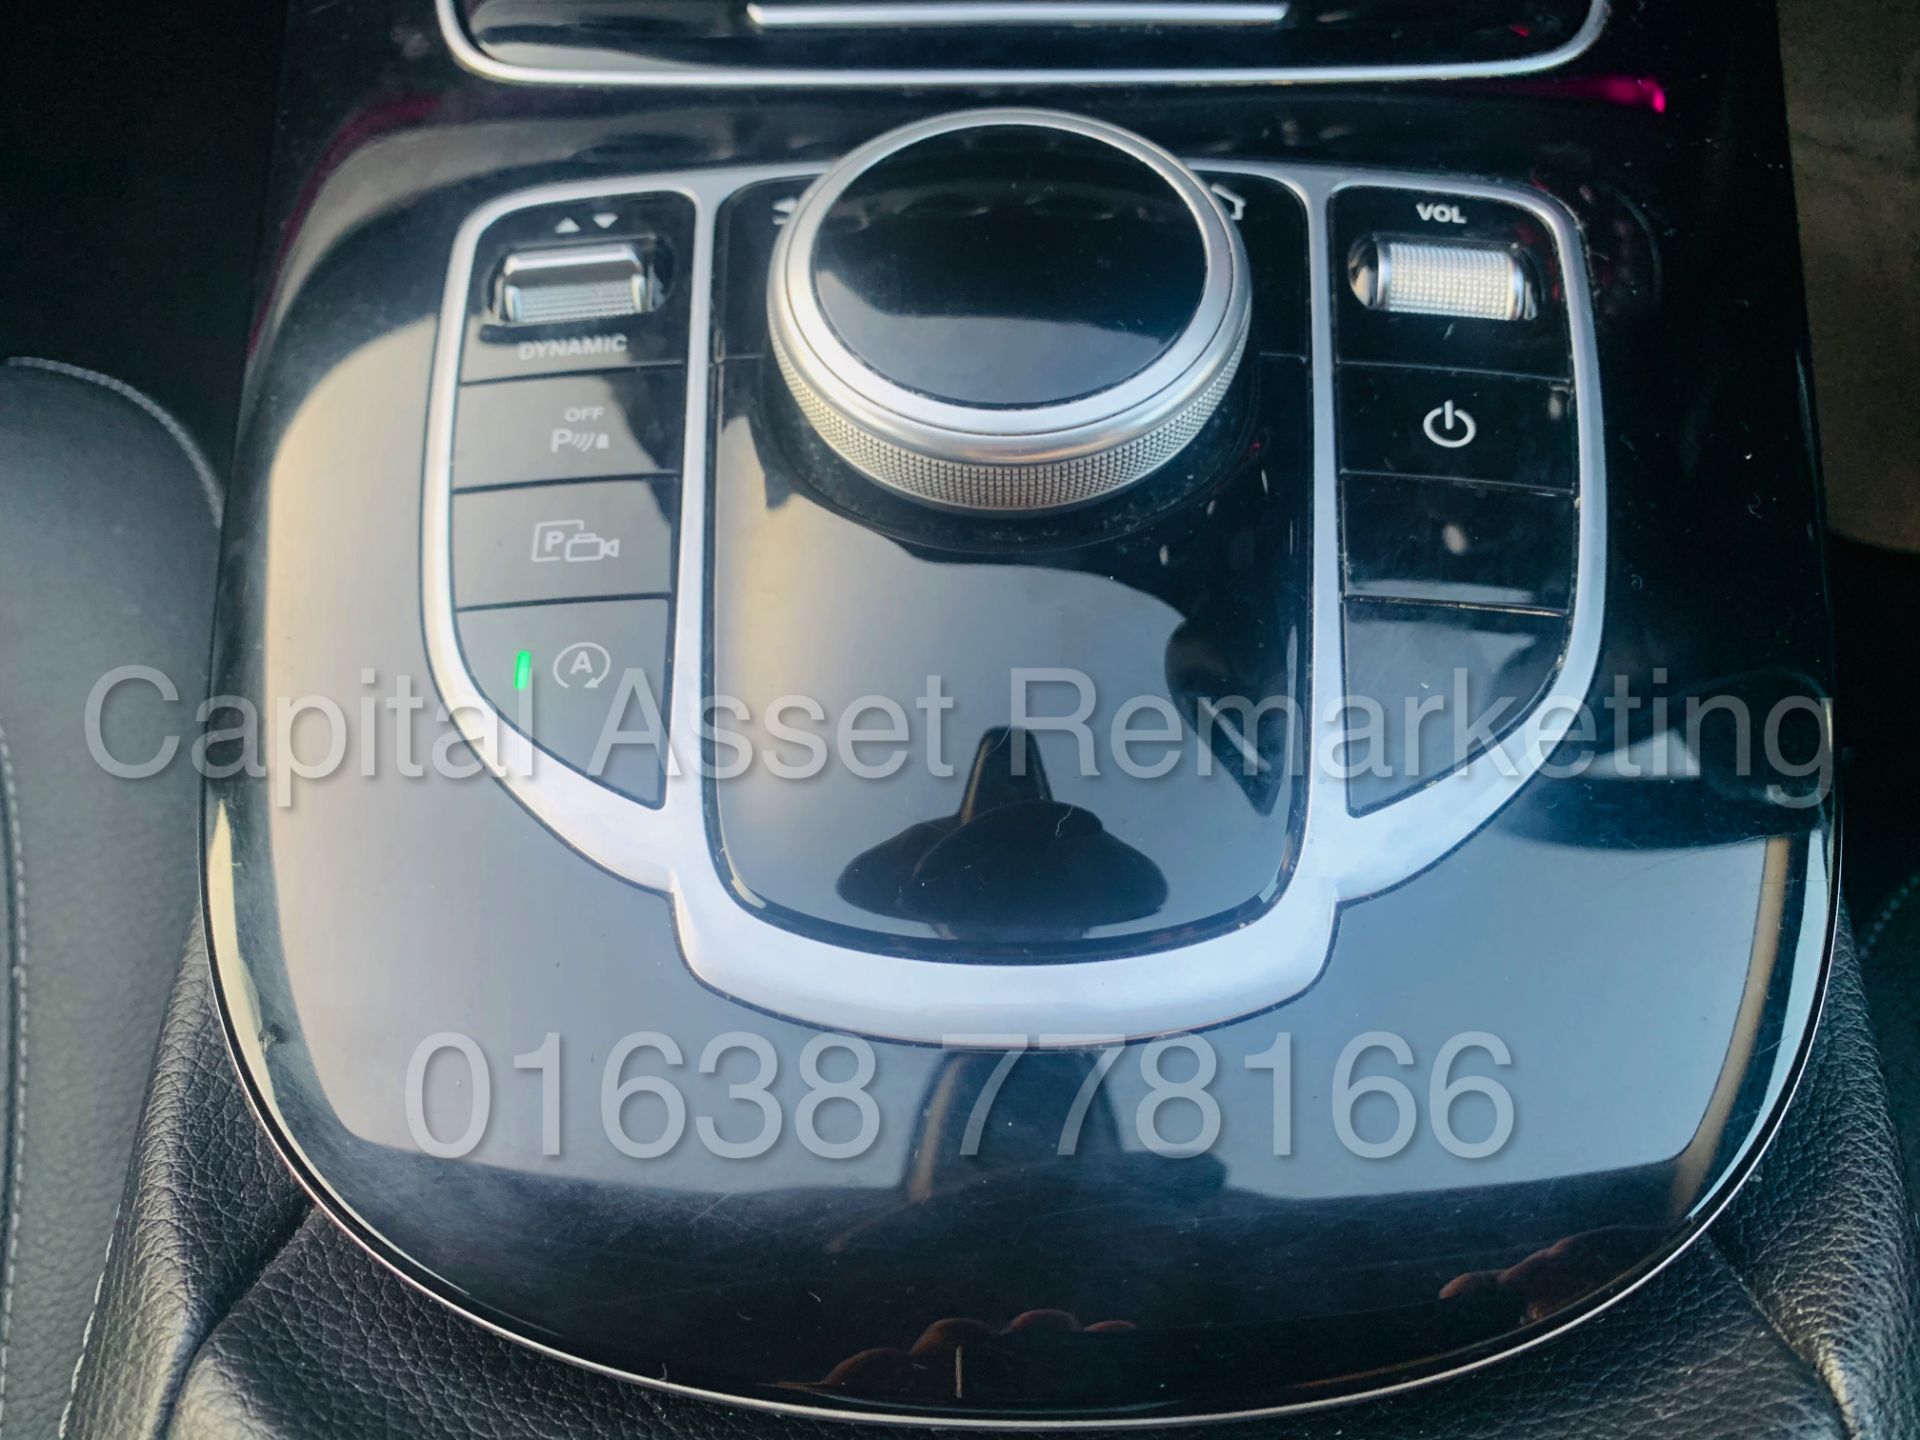 (On Sale) MERCEDES-BENZ E220D *SALOON* (2018 - NEW MODEL) '9-G TRONIC AUTO - LEATHER - SAT NAV' - Image 48 of 53